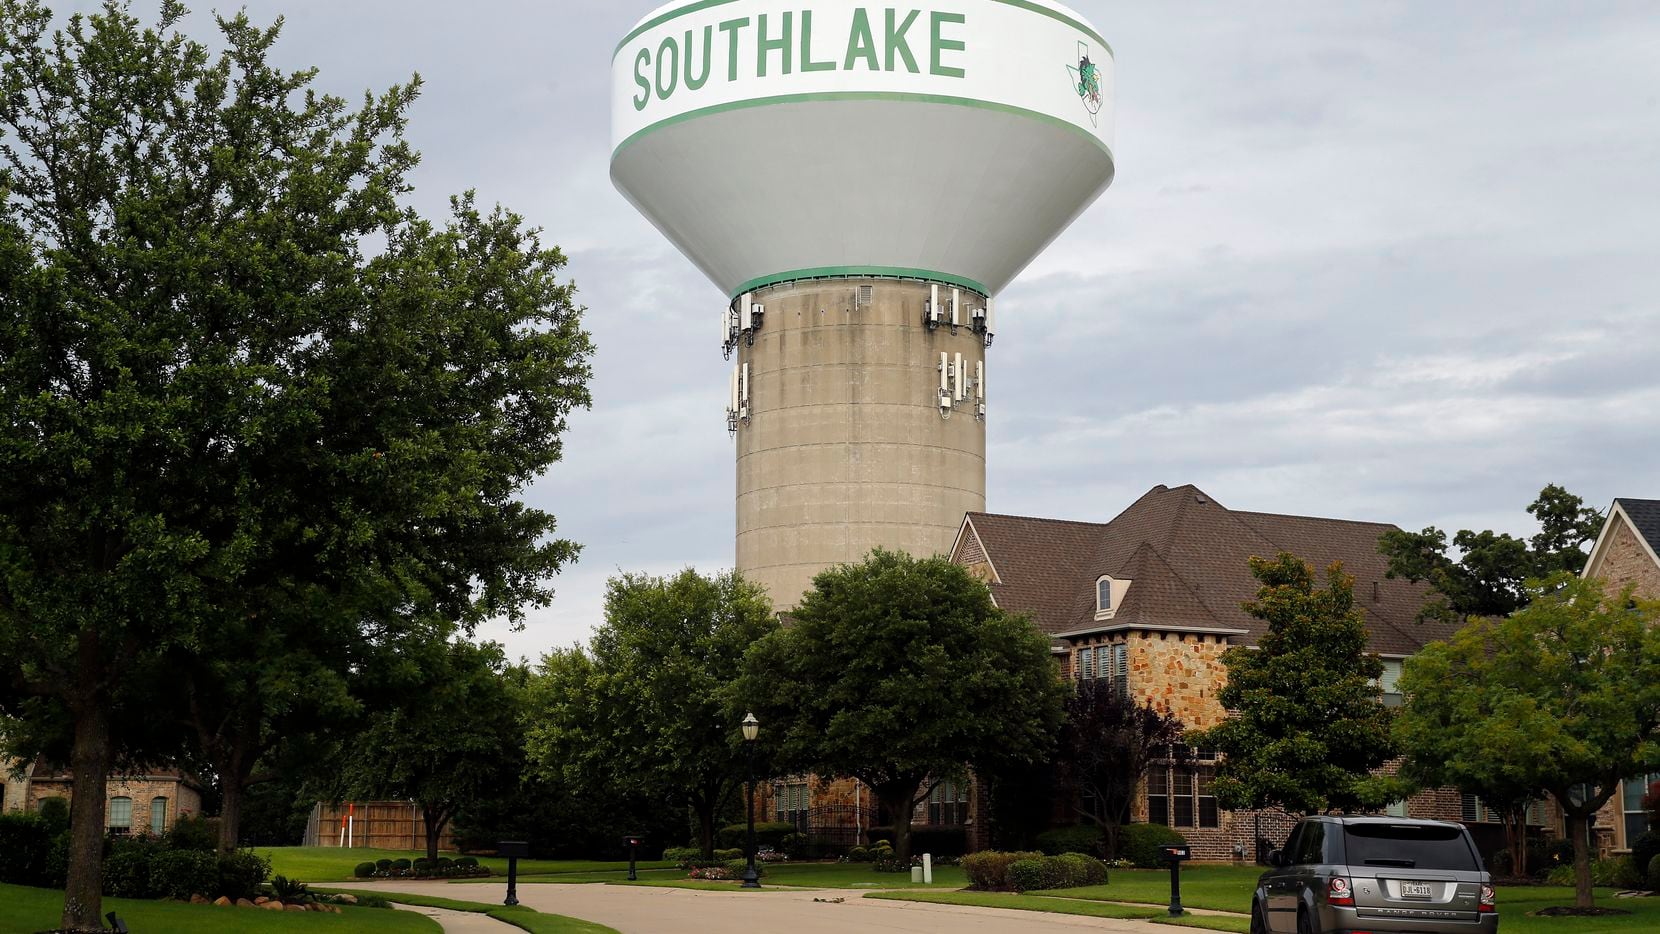 Southlake found itself the focus of some big headlines over the past year. Here are the ones...